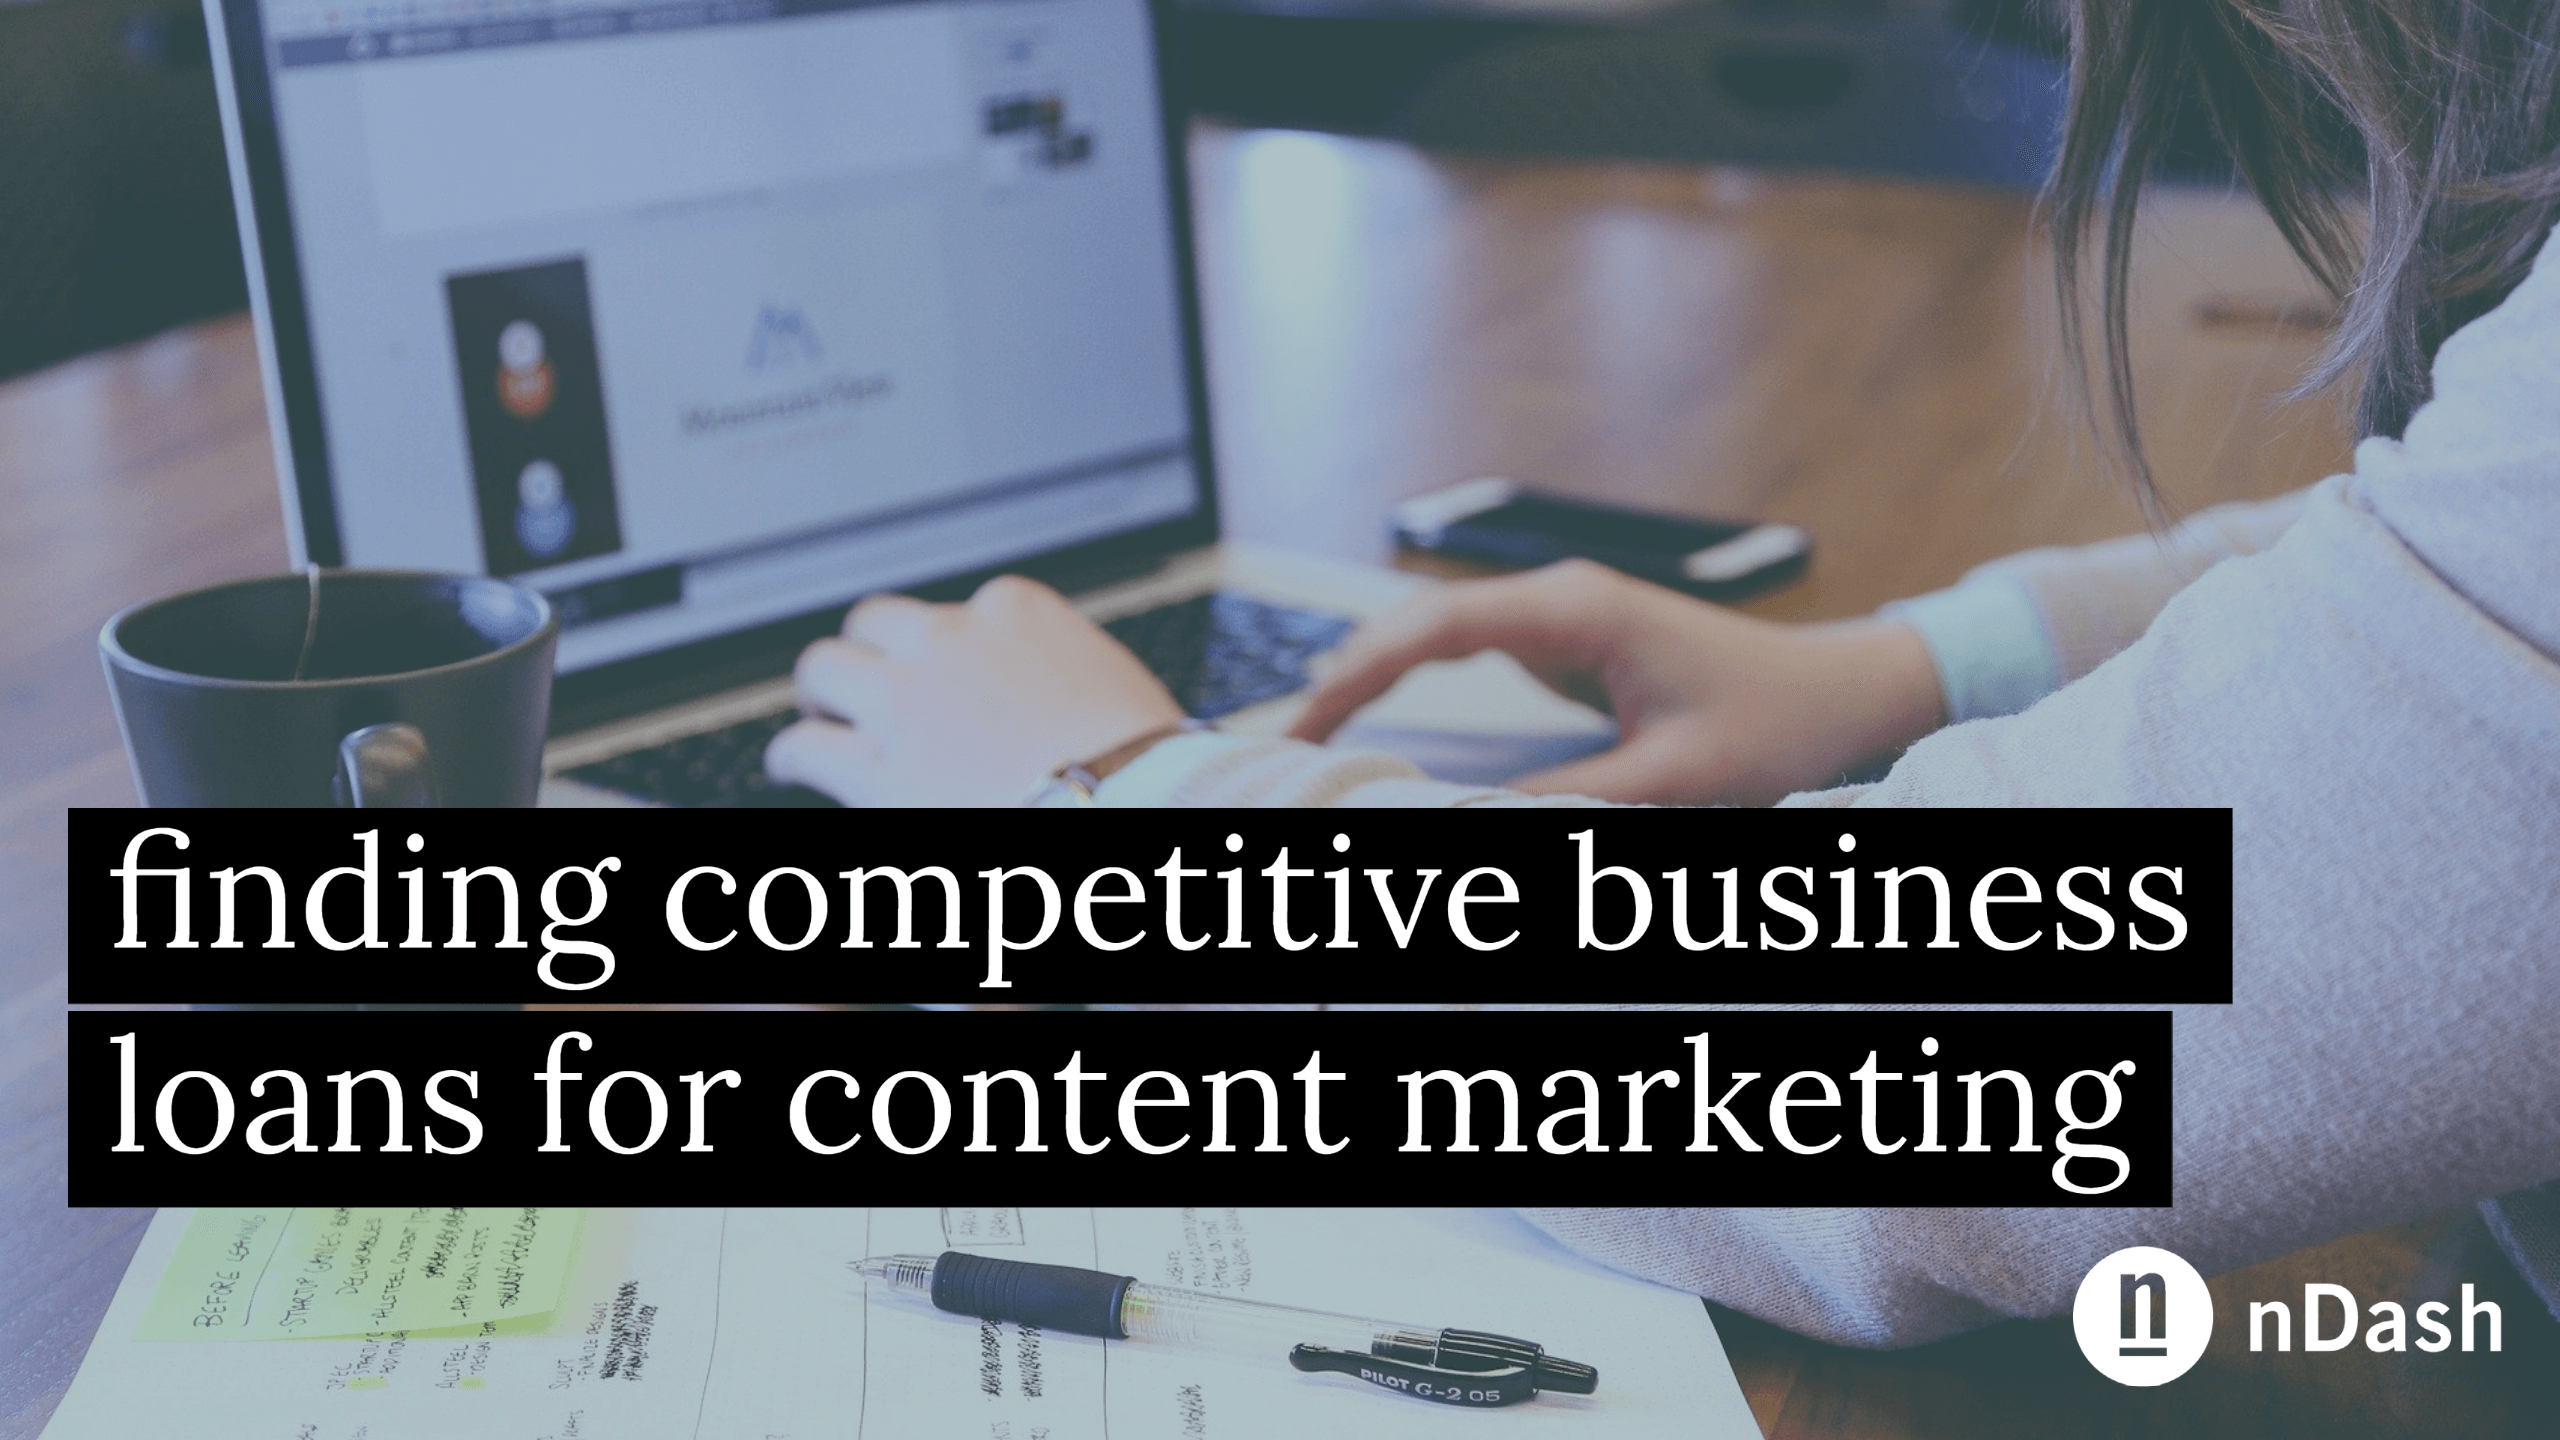 Finding Competitive Business Loans for Content Marketing